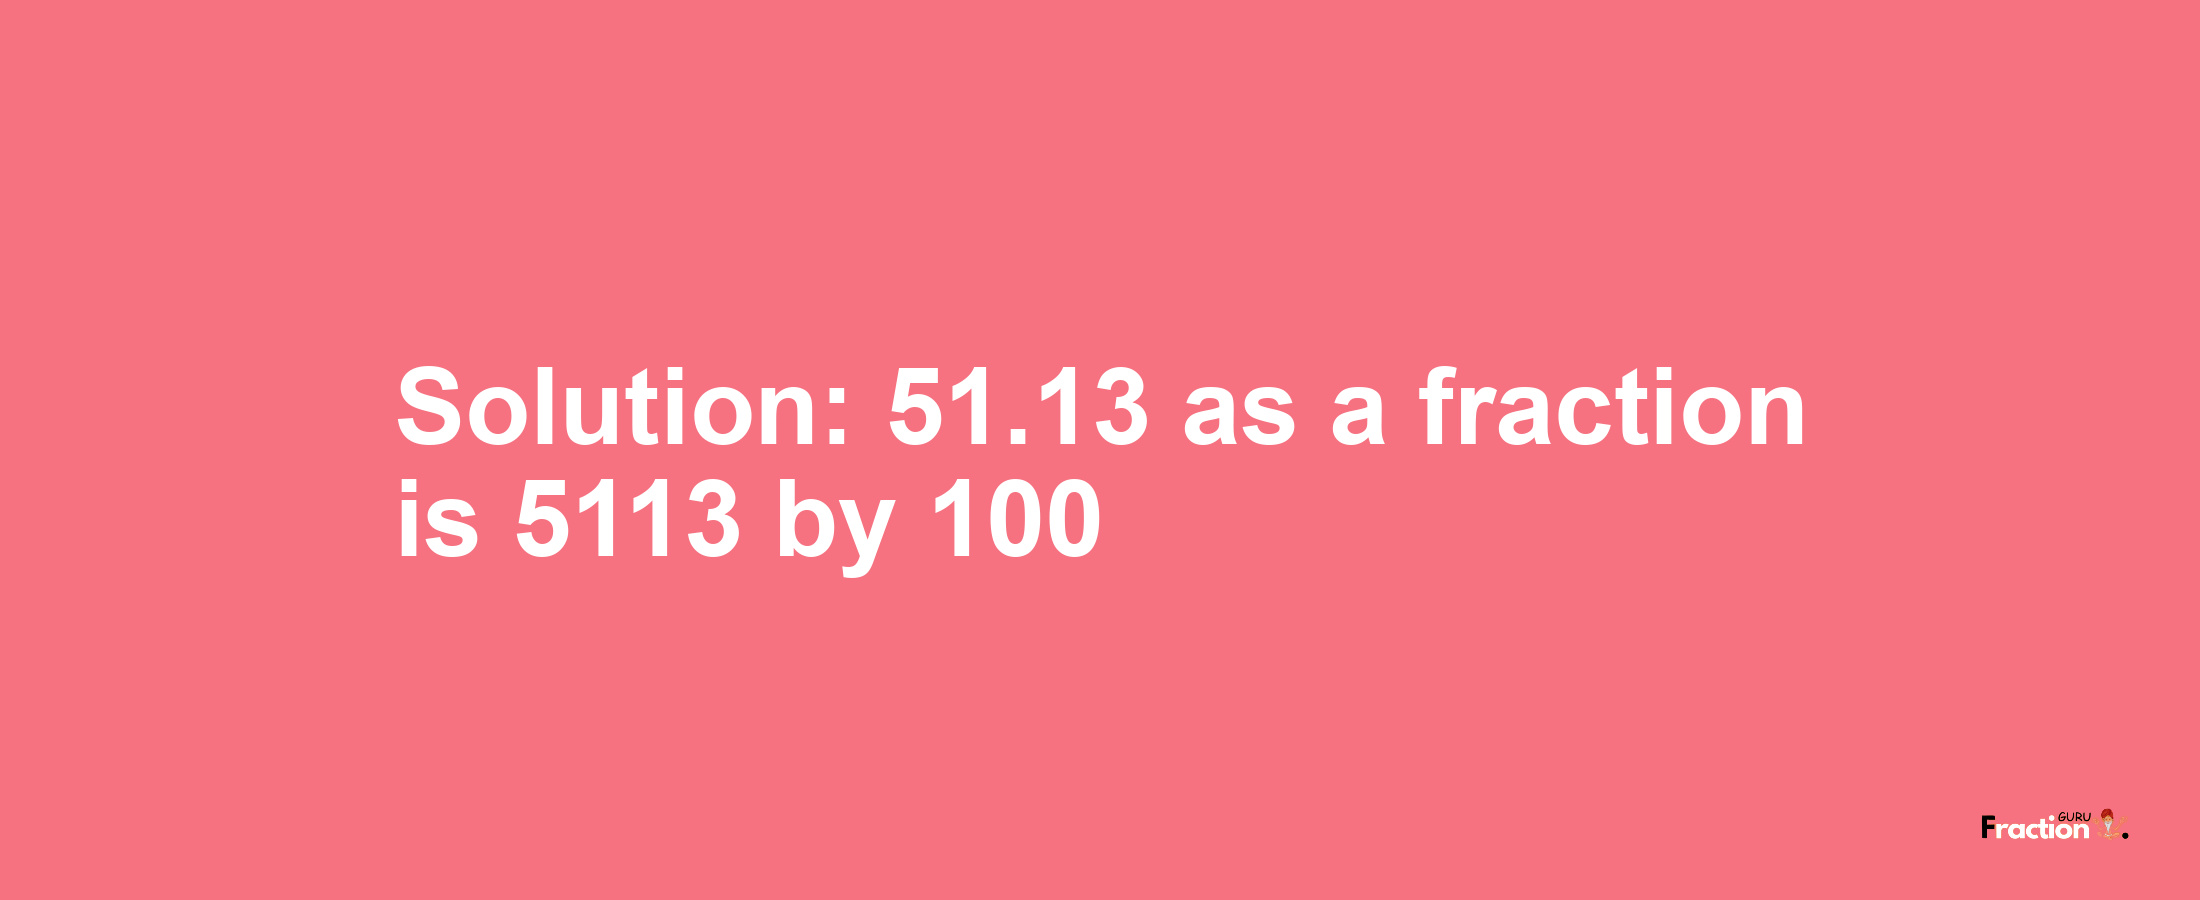 Solution:51.13 as a fraction is 5113/100